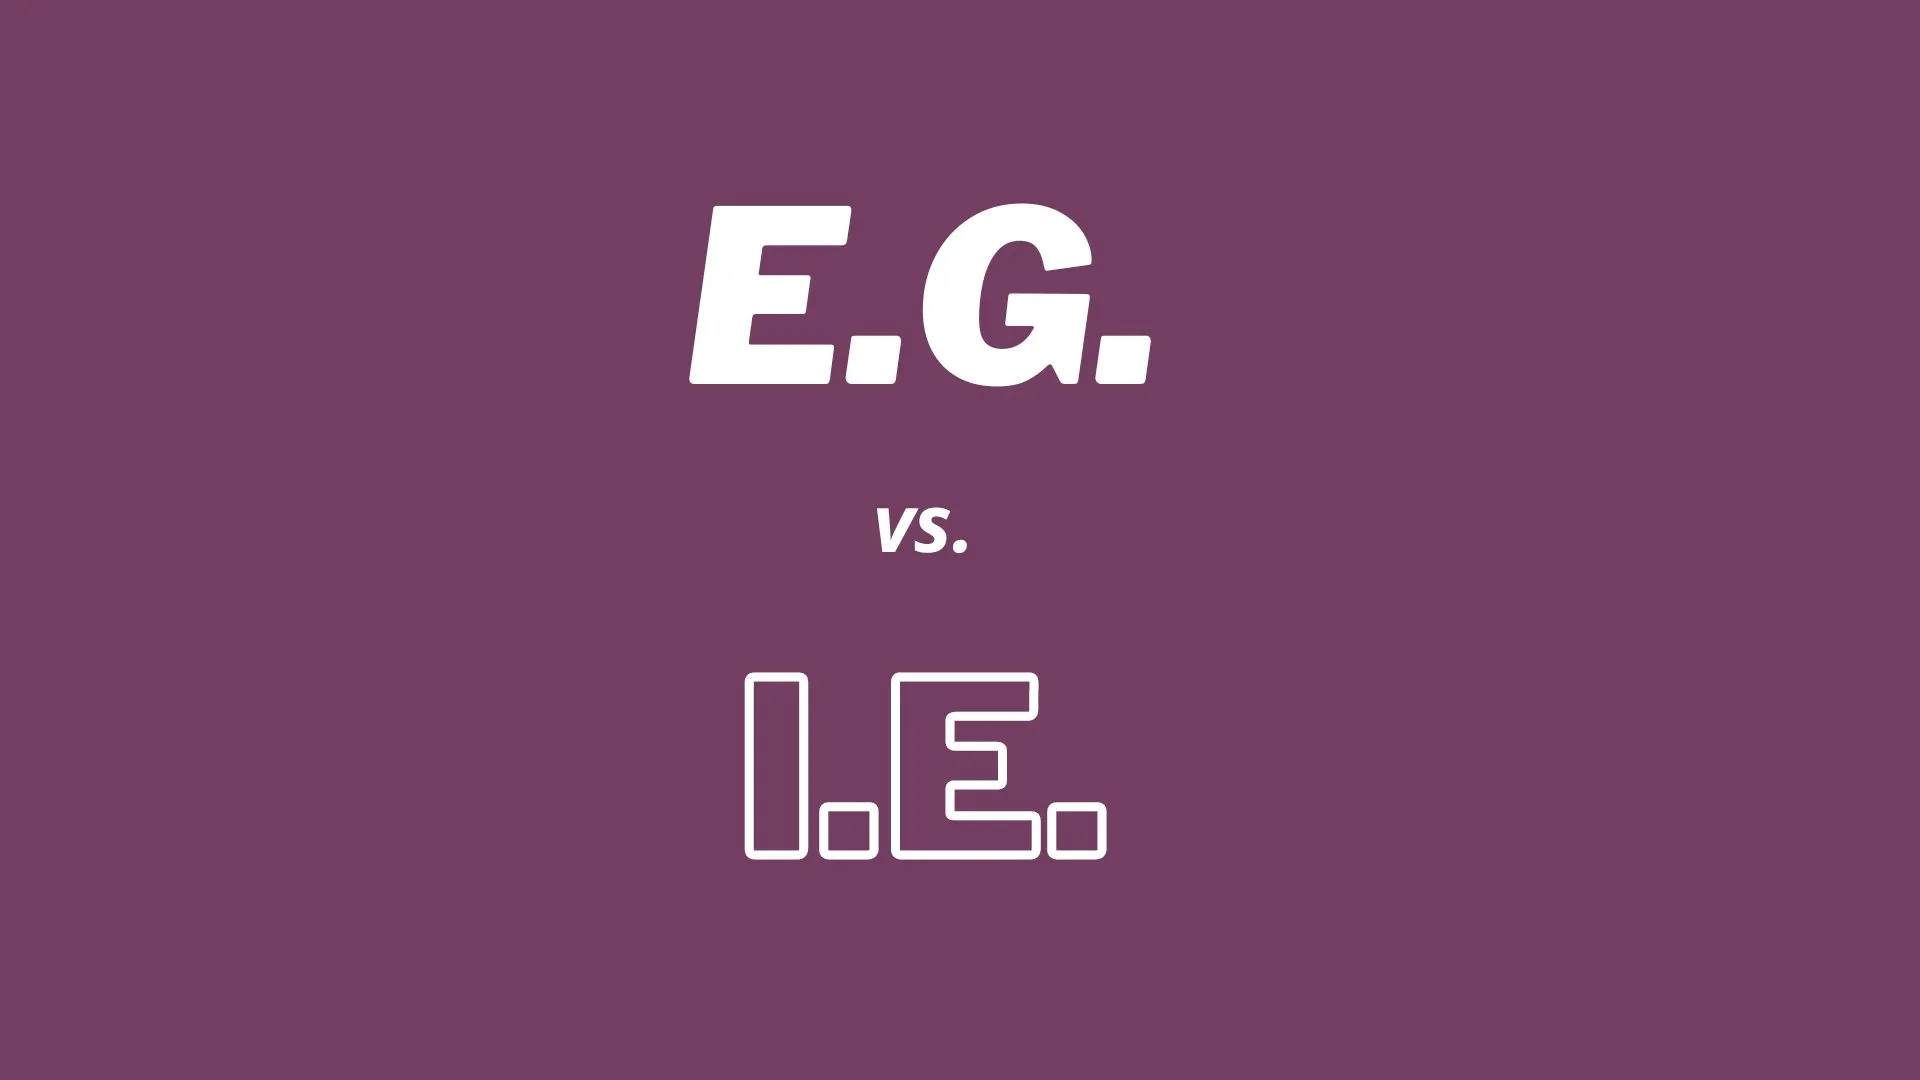 Difference between E.g. and. I.e.